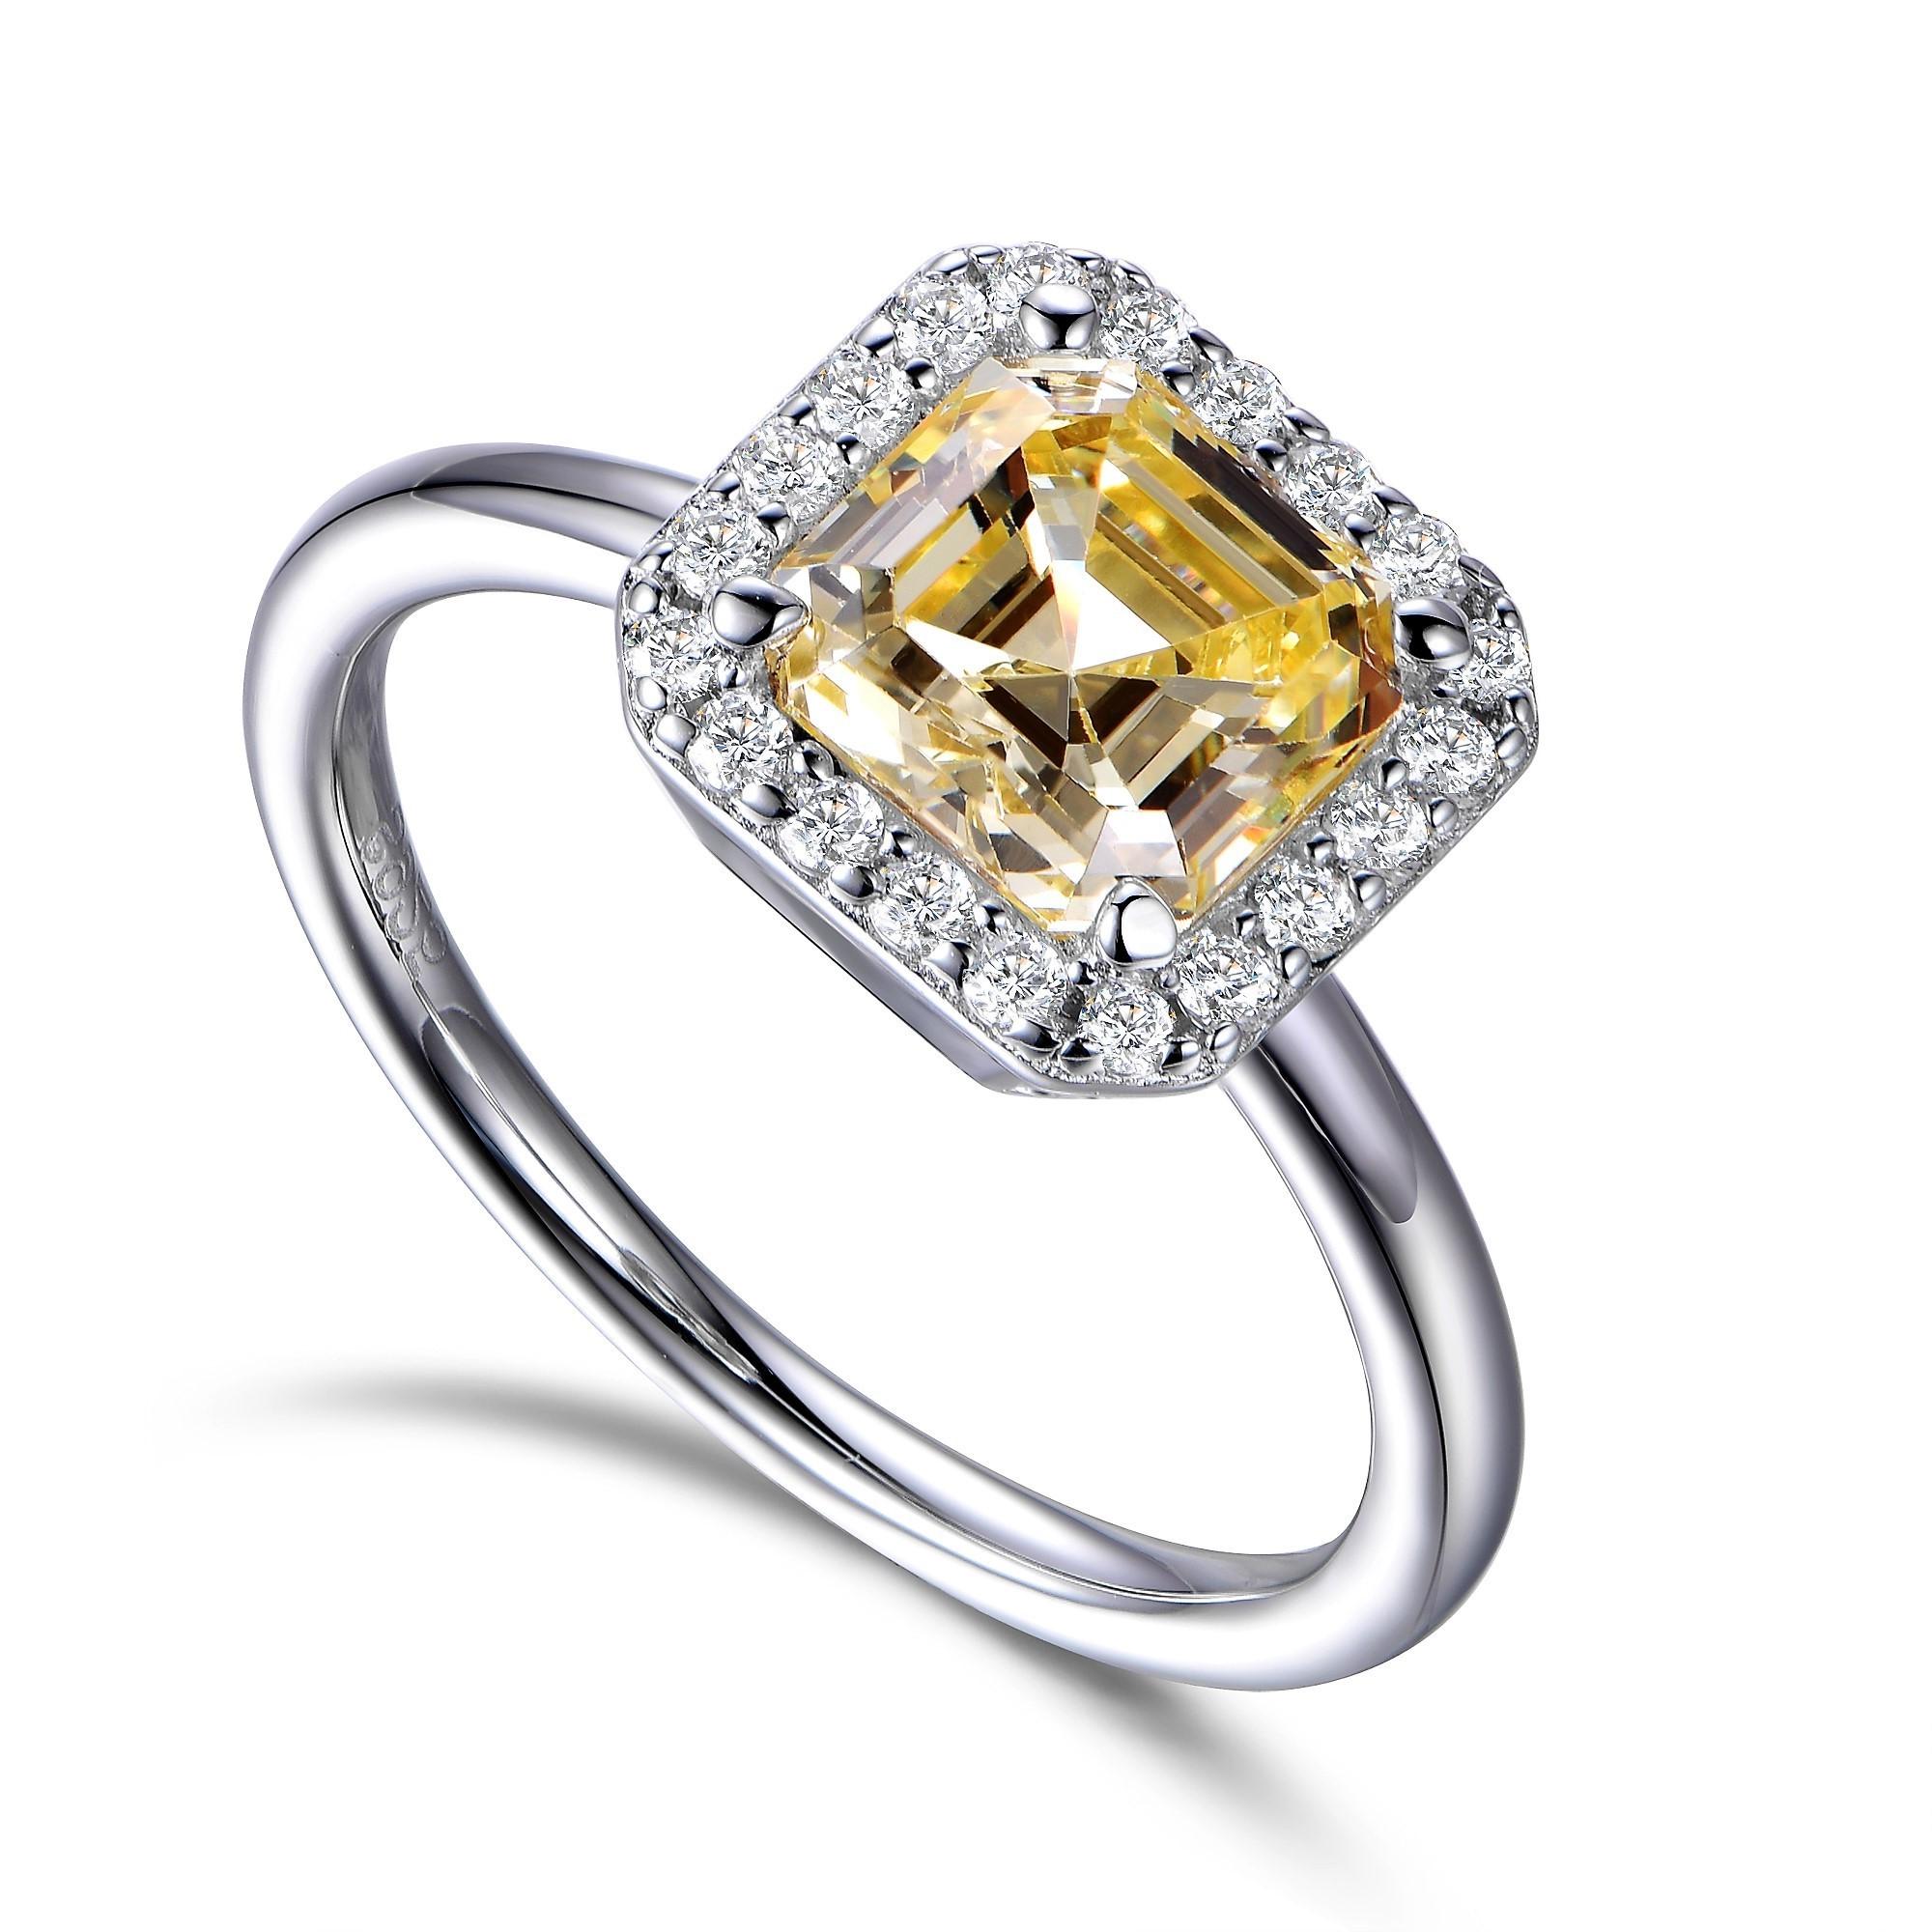 Golden honey tones emanate from this stylish 3.00ct yellow asscher cut cubic zirconia surrounded by a halo of 20 smaller round brilliant cut cubic zirconia. 

Composed of 925 sterling silver with a high gloss white rhodium finish. 

Matching Yellow